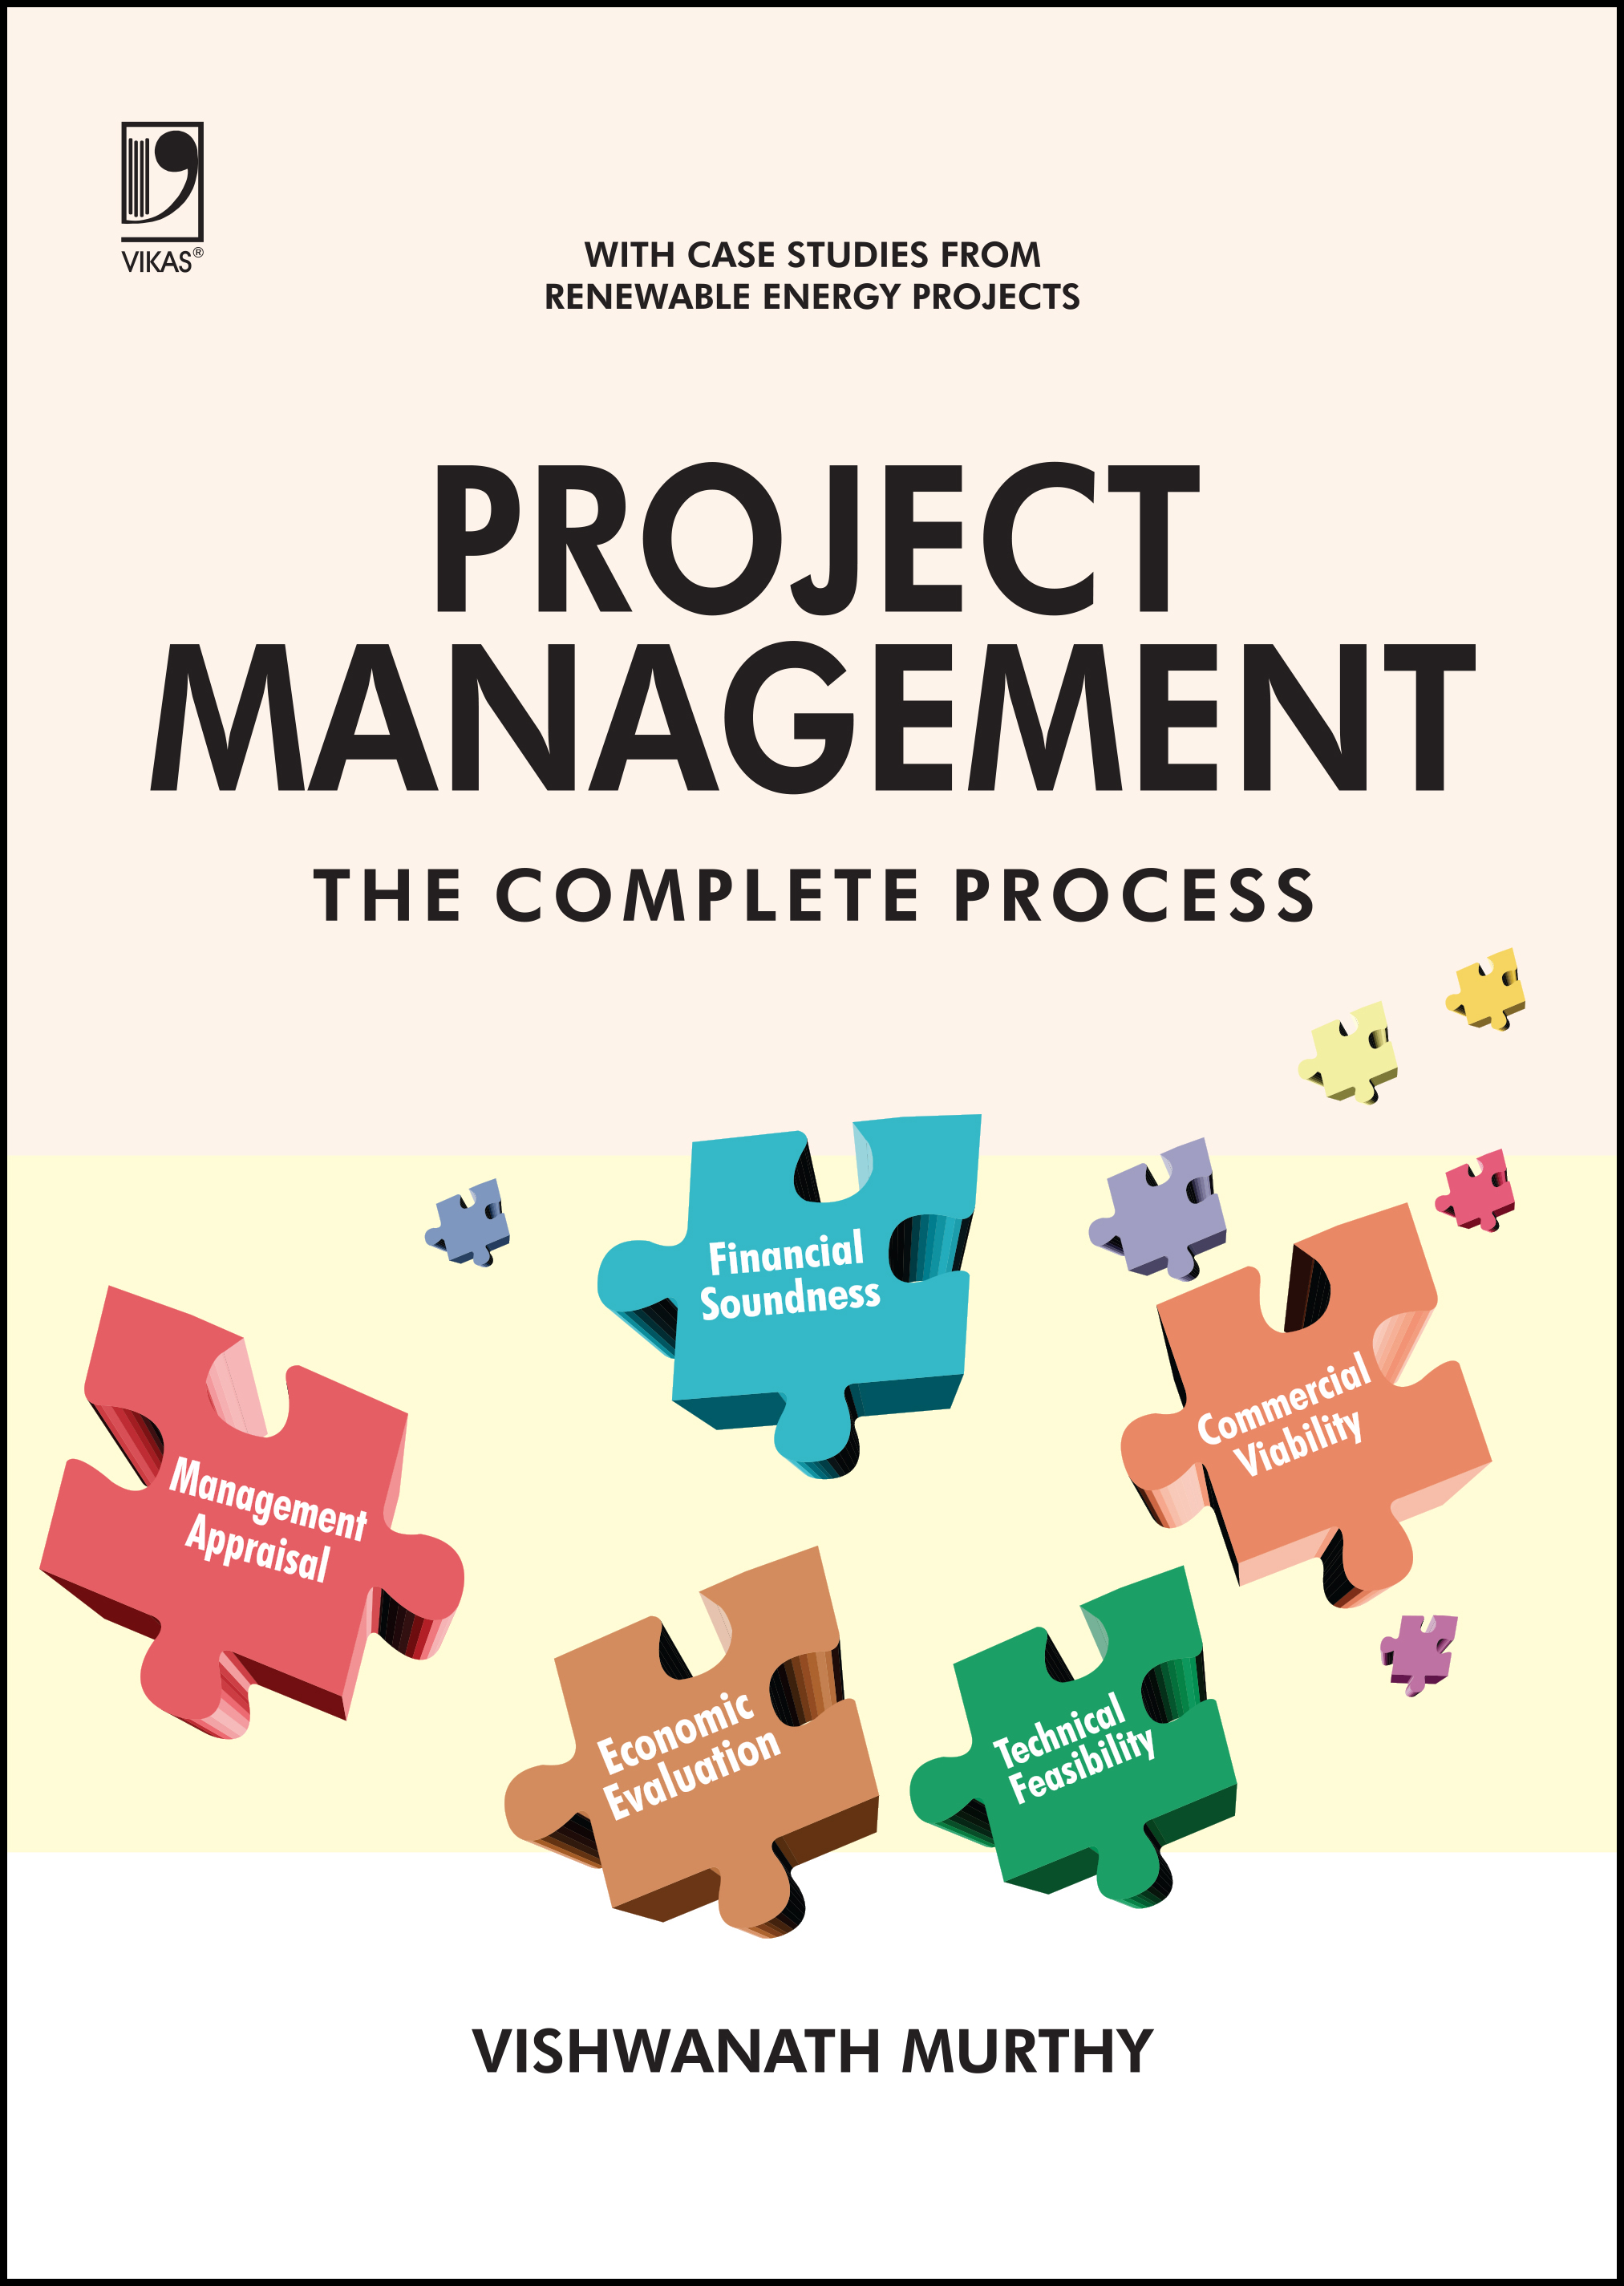 Project Management – The Complete Process (with Case Studies from Renewable Energy Sector)